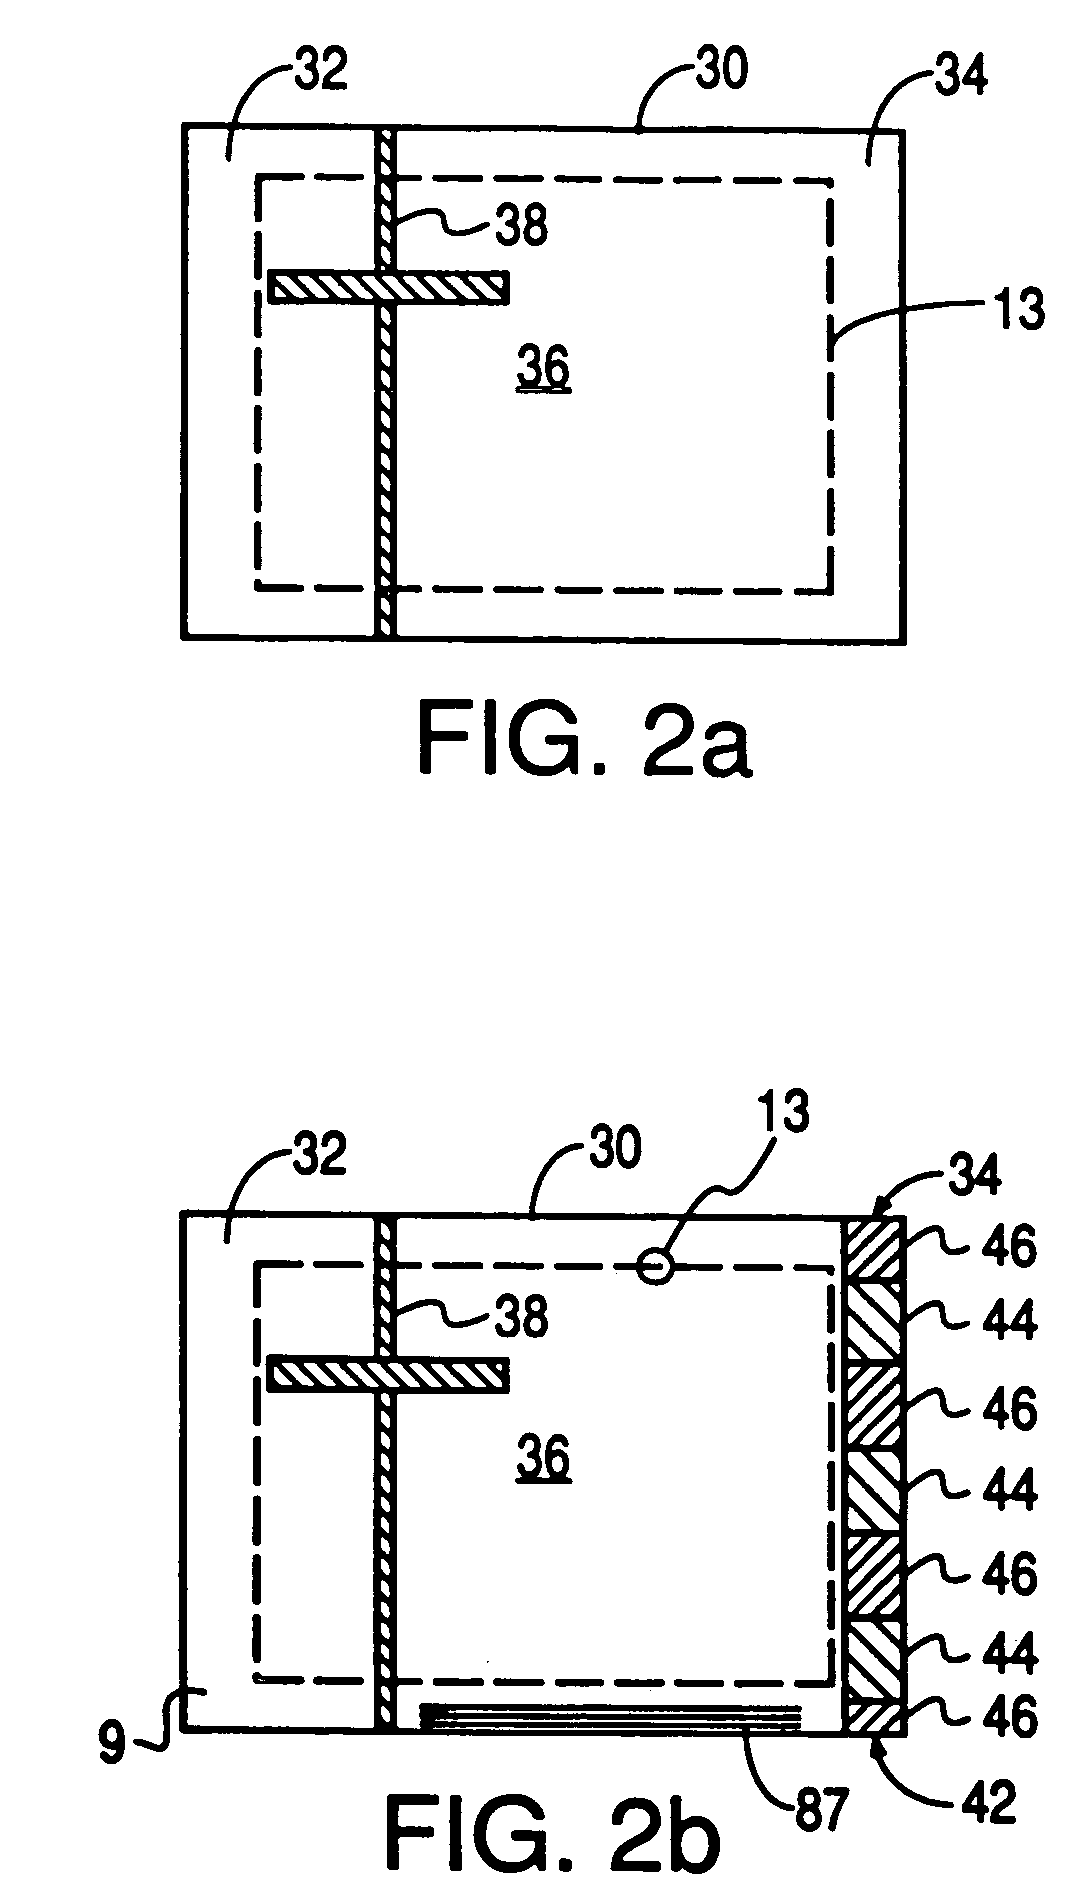 Copy protection for video signal using narrowed horizontal synchronization signals and amplitude modulation